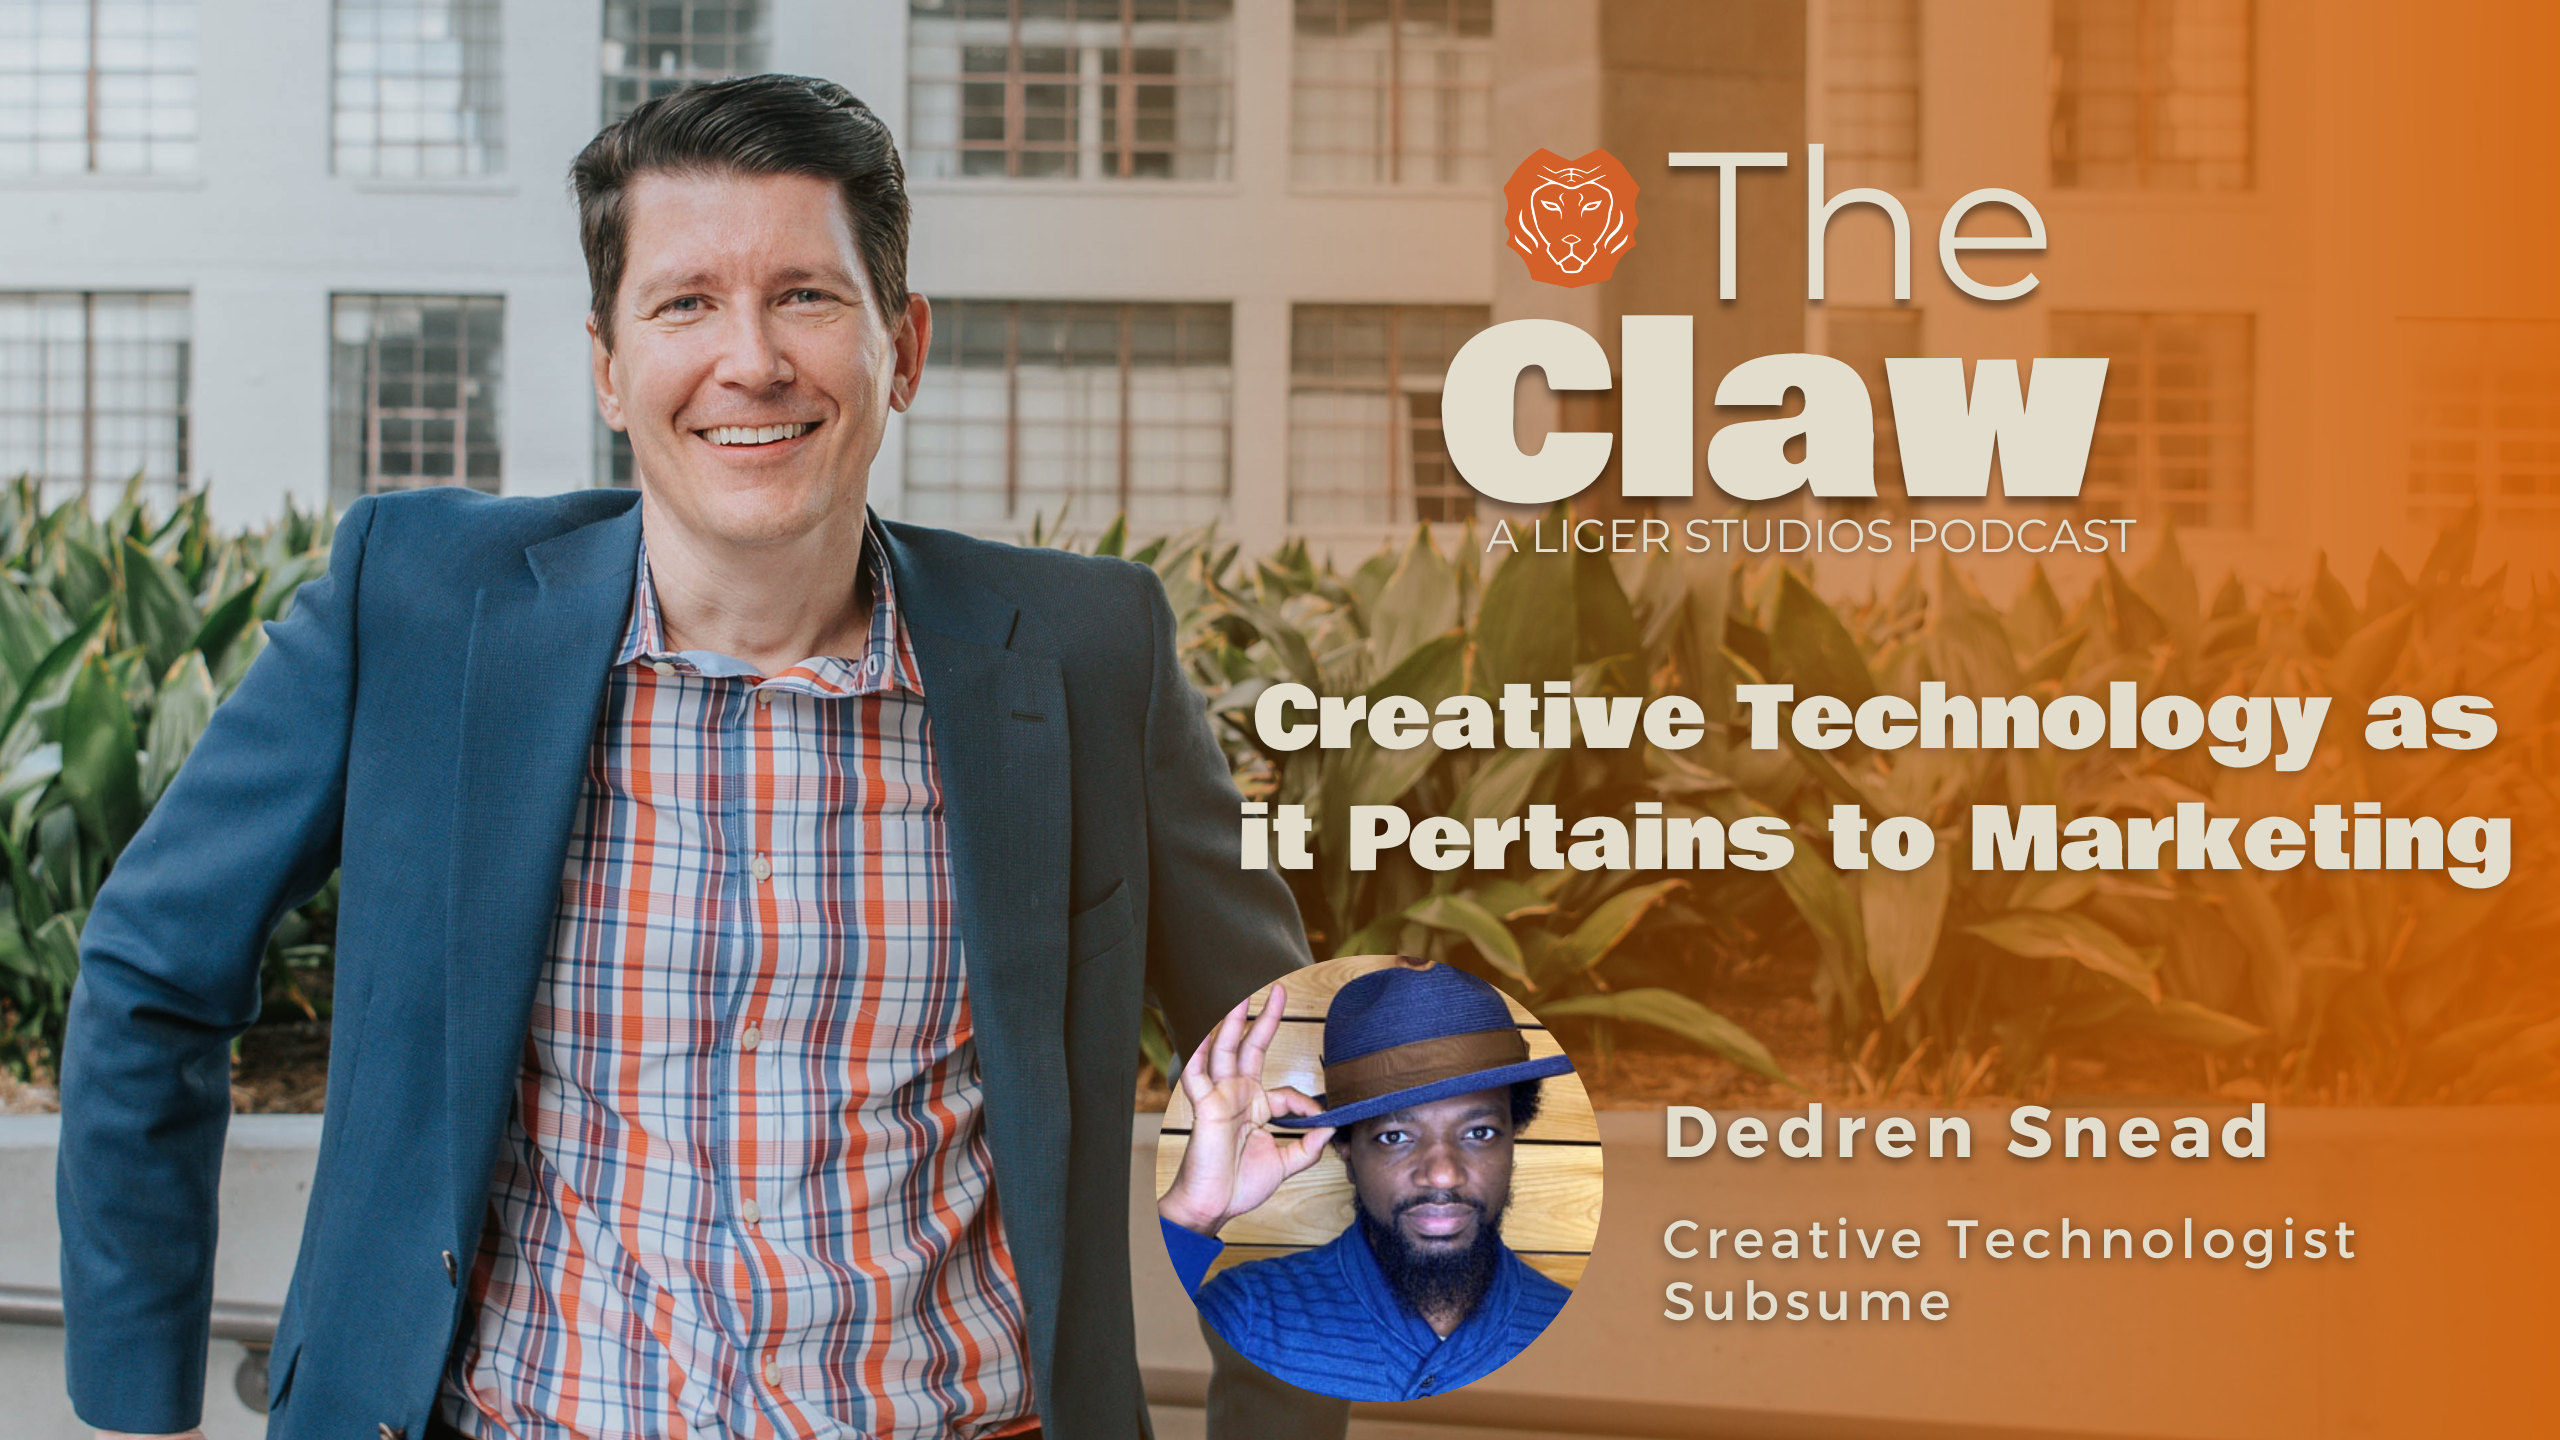 The Claw Podcast: Creative Technology as it Pertains to Marketing with Dedren Snead